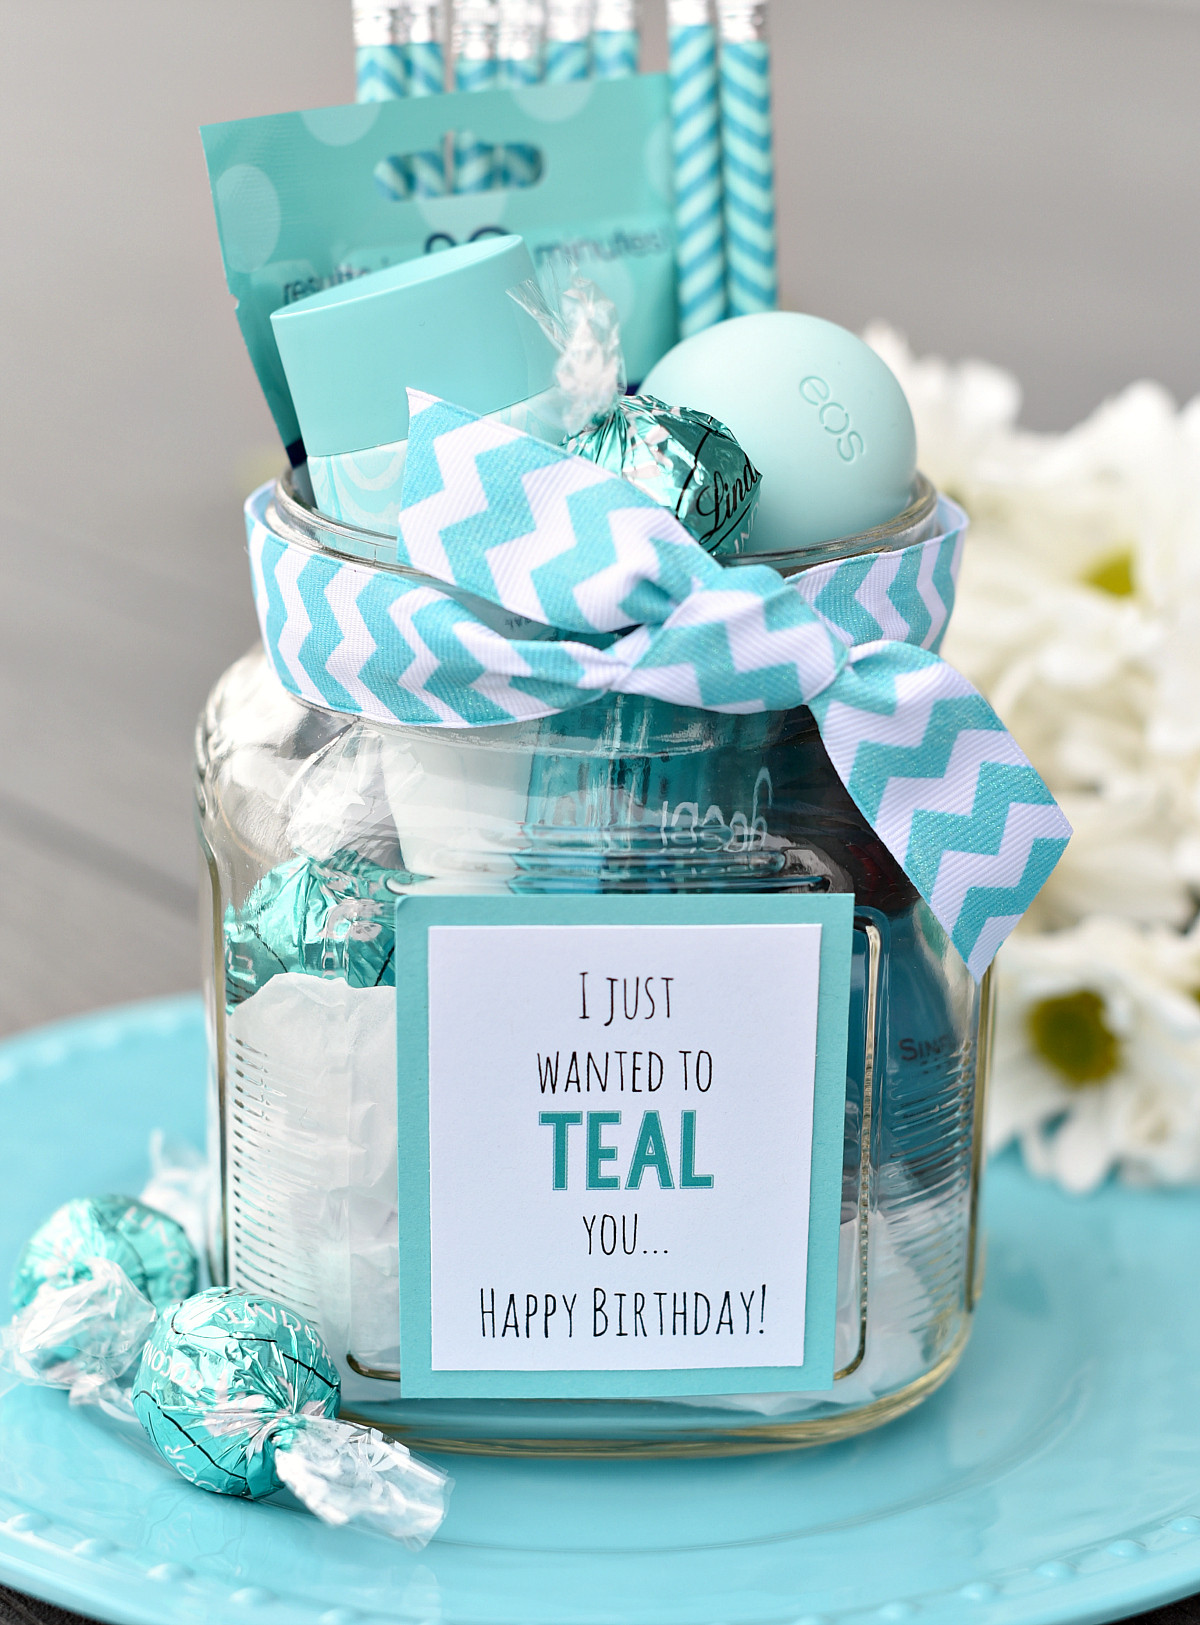 Gift Ideas For Friends Birthday Female
 Teal Birthday Gift Idea for Friends – Fun Squared